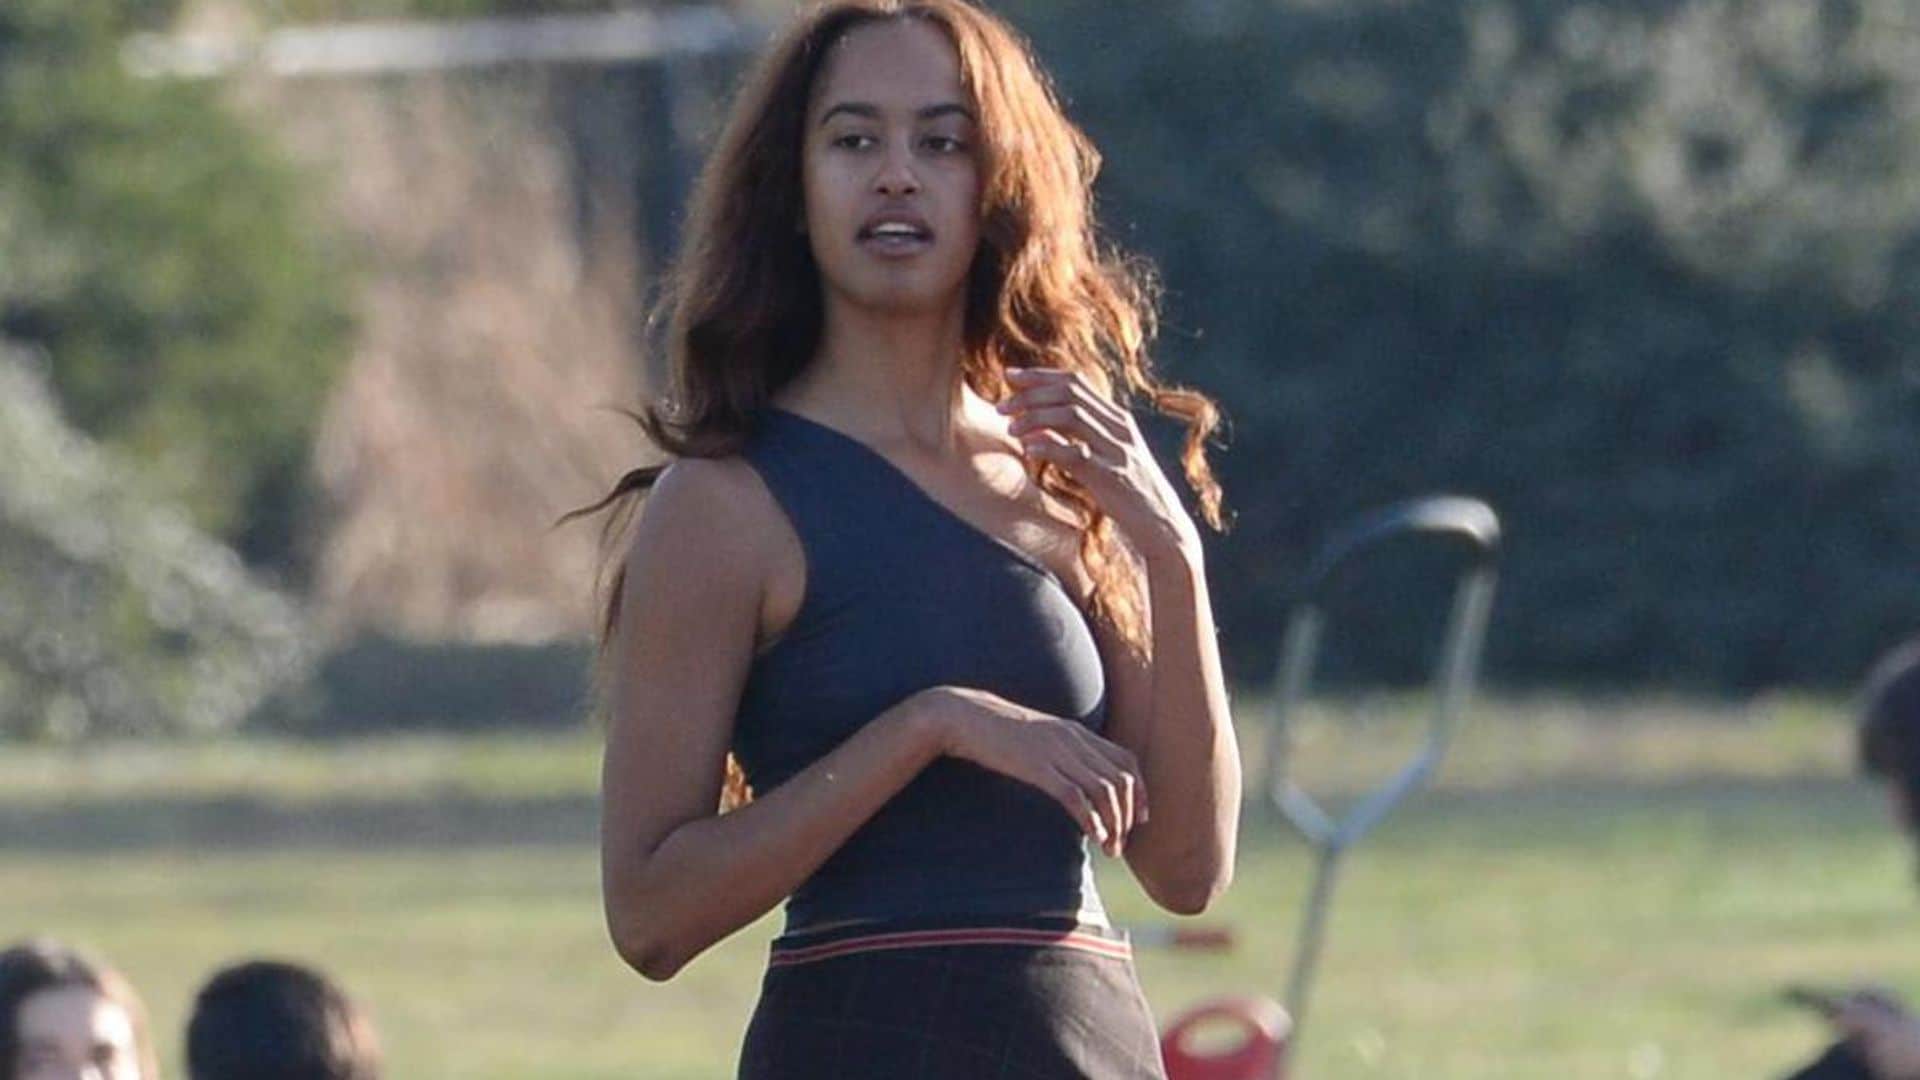 Malia Obama’s chic fall outfit includes high slit skirt and leather boots